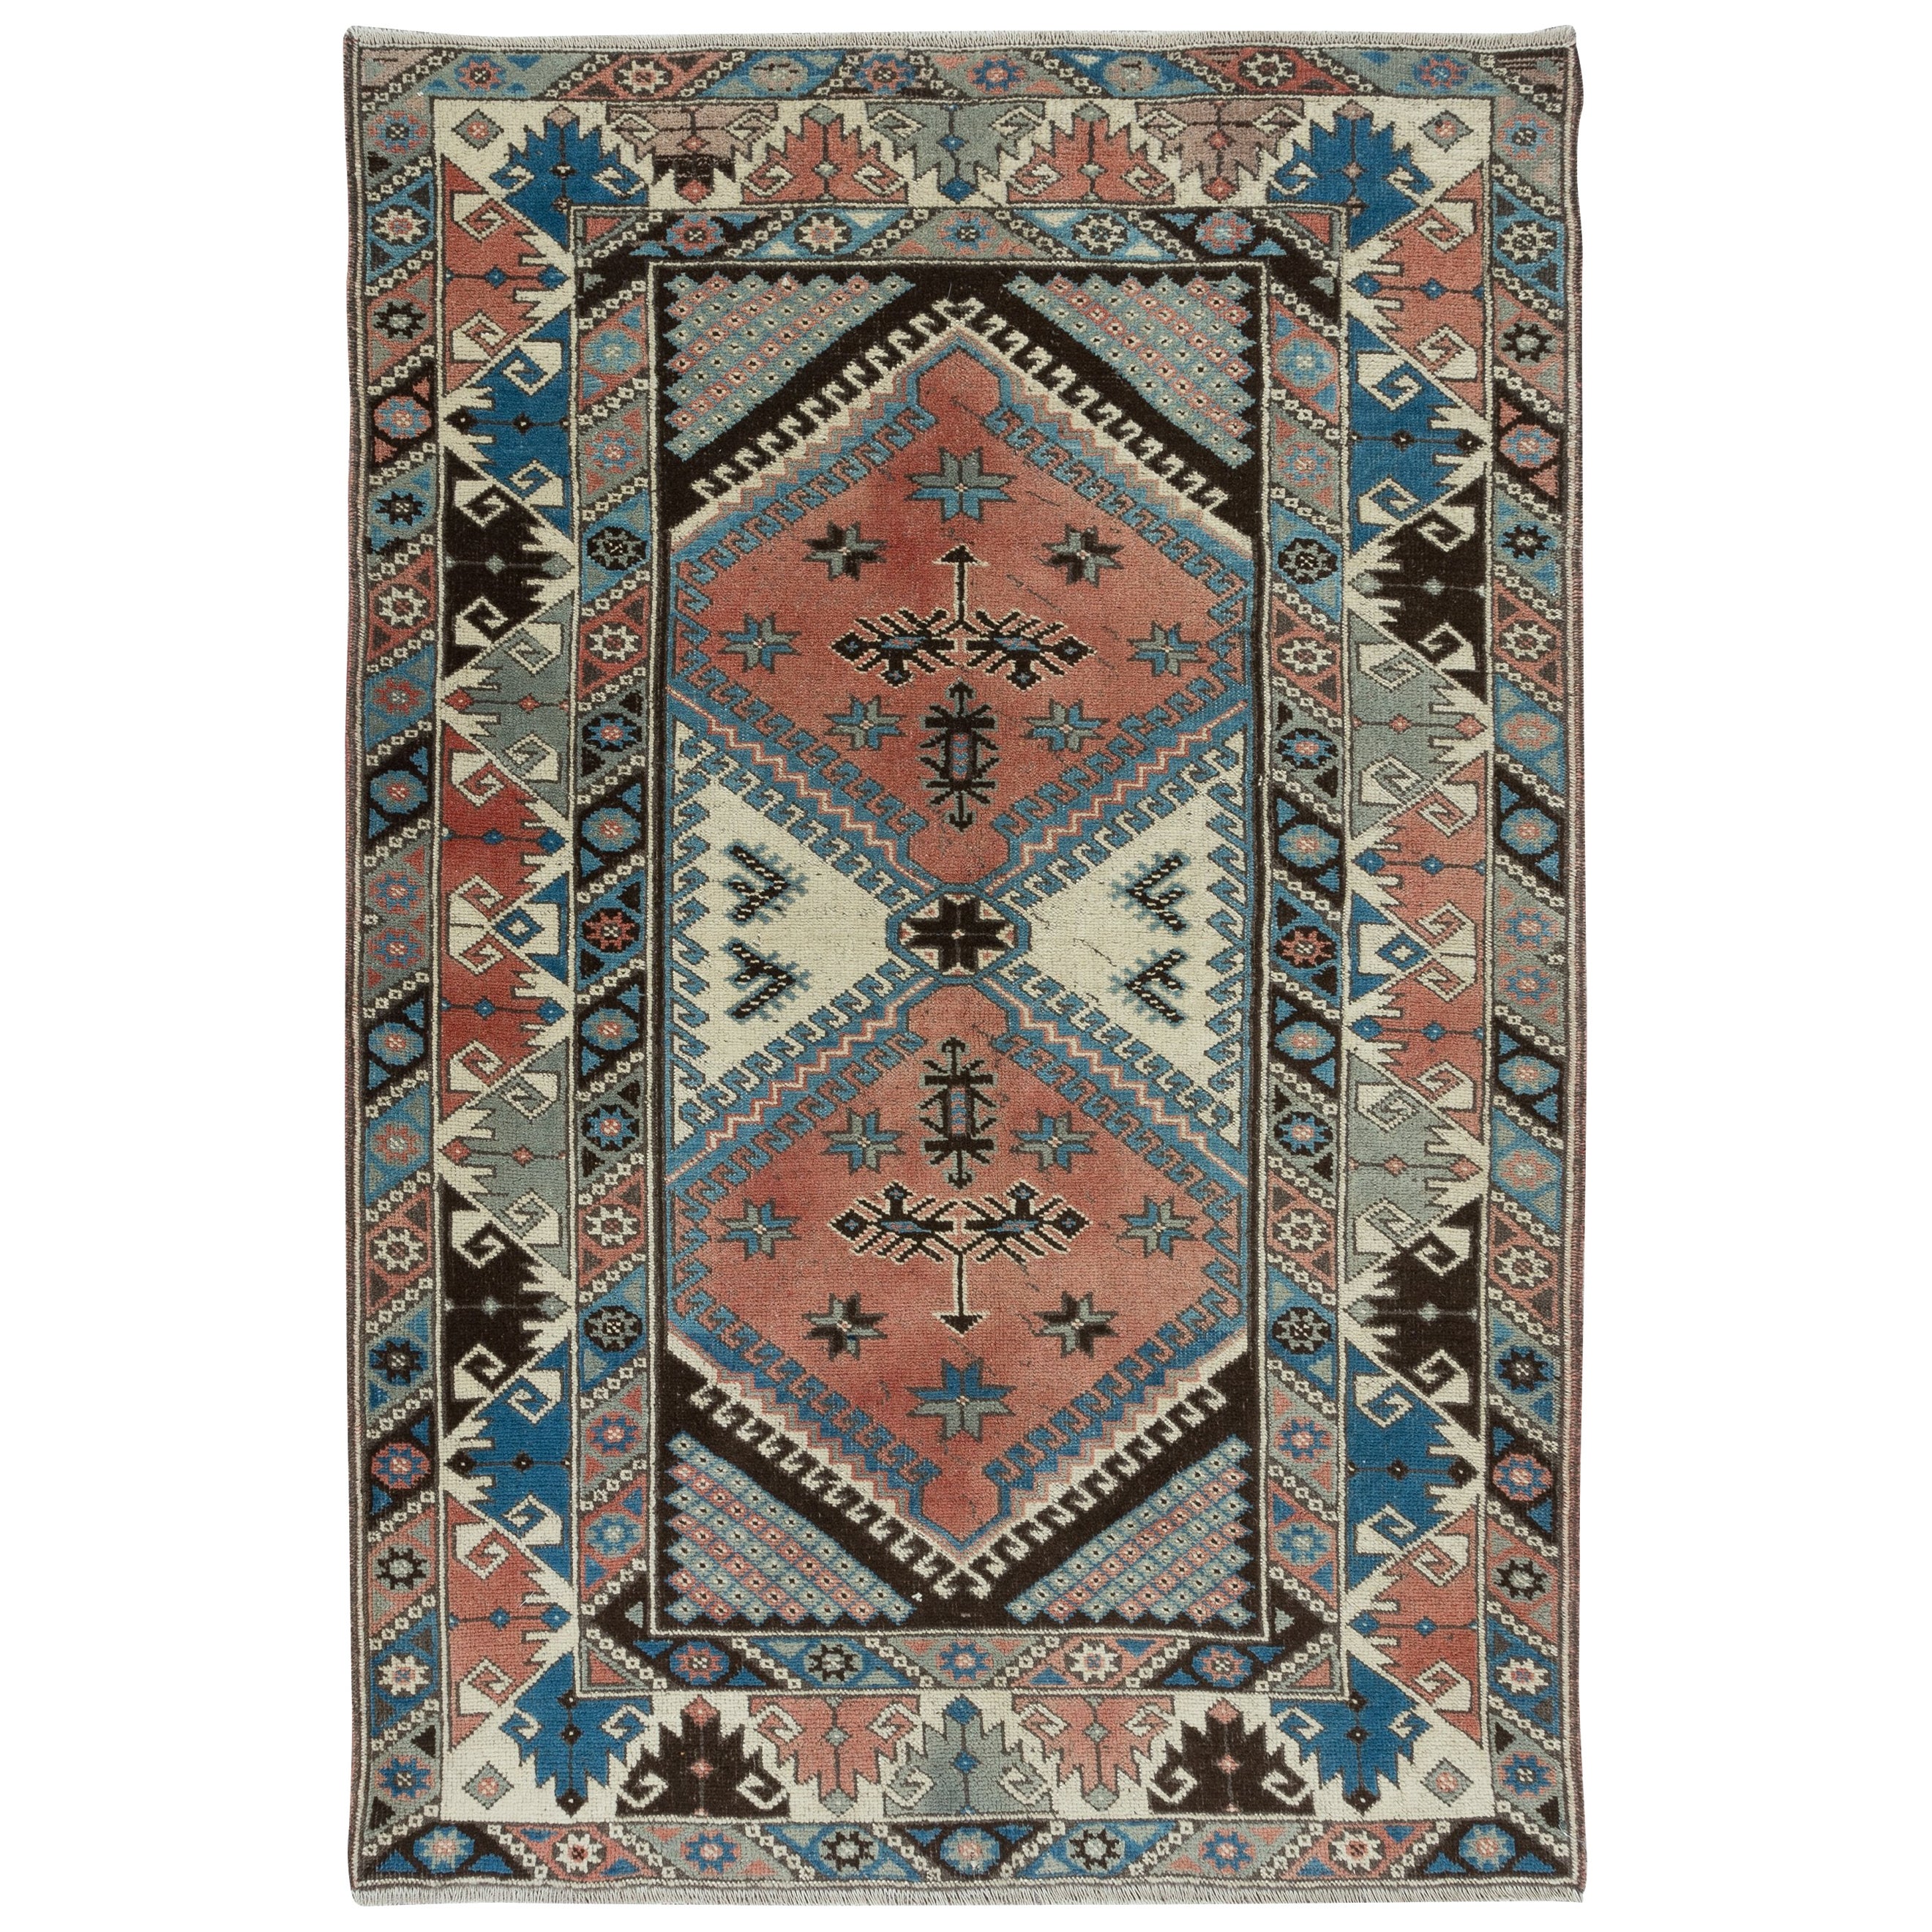 4x6 Ft Unique Vintage Handmade Turkish Area Rug with Geometric Patters, All Wool For Sale